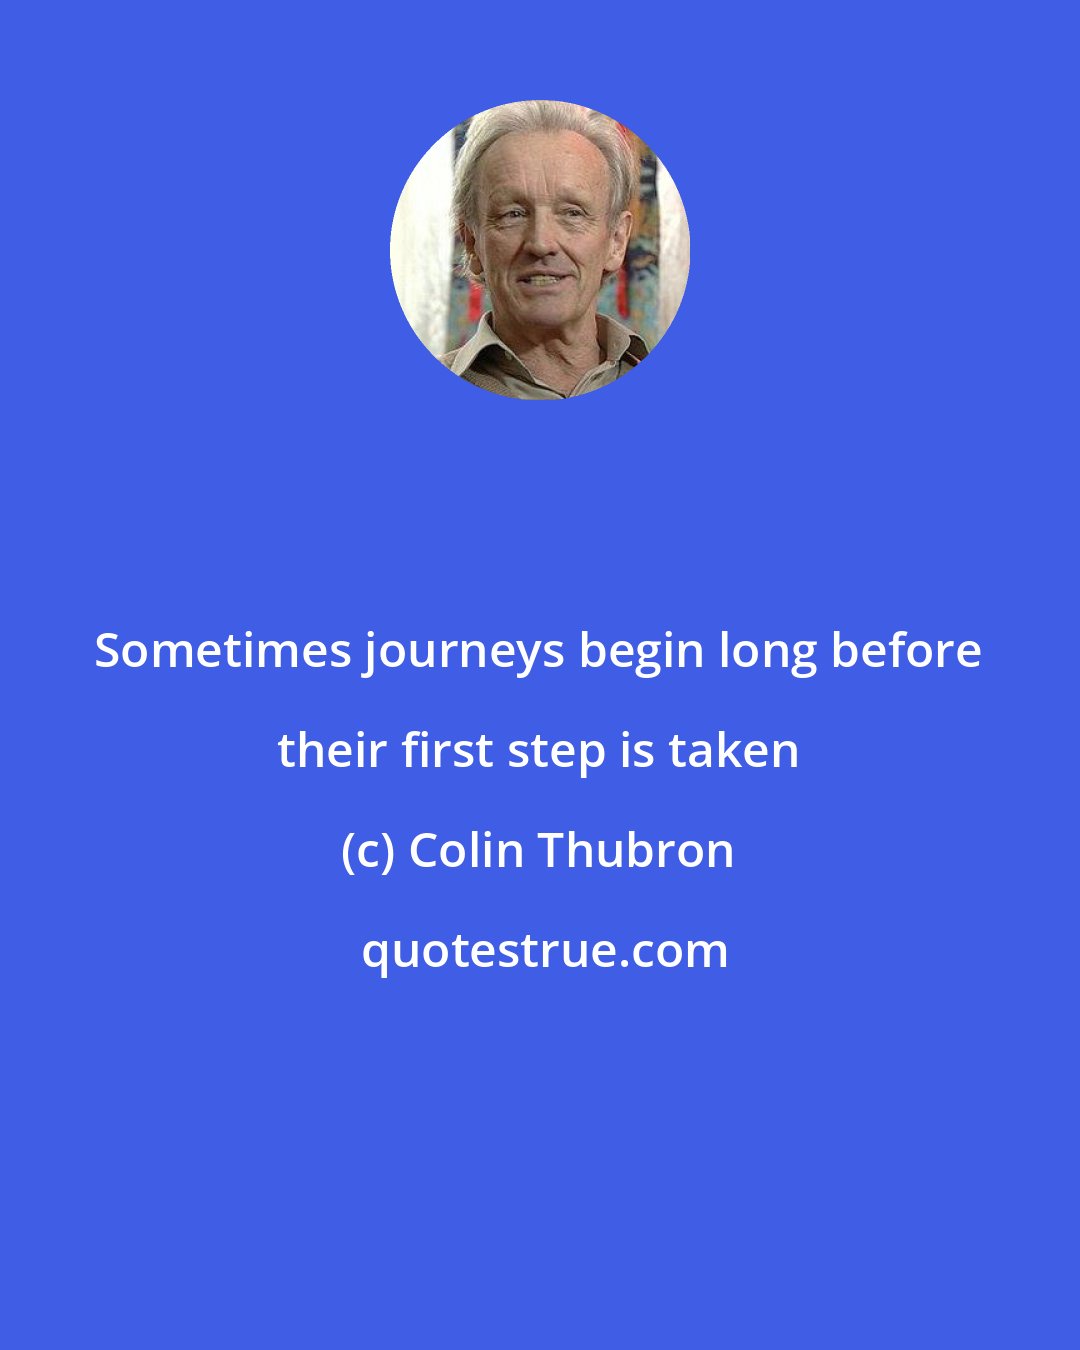 Colin Thubron: Sometimes journeys begin long before their first step is taken